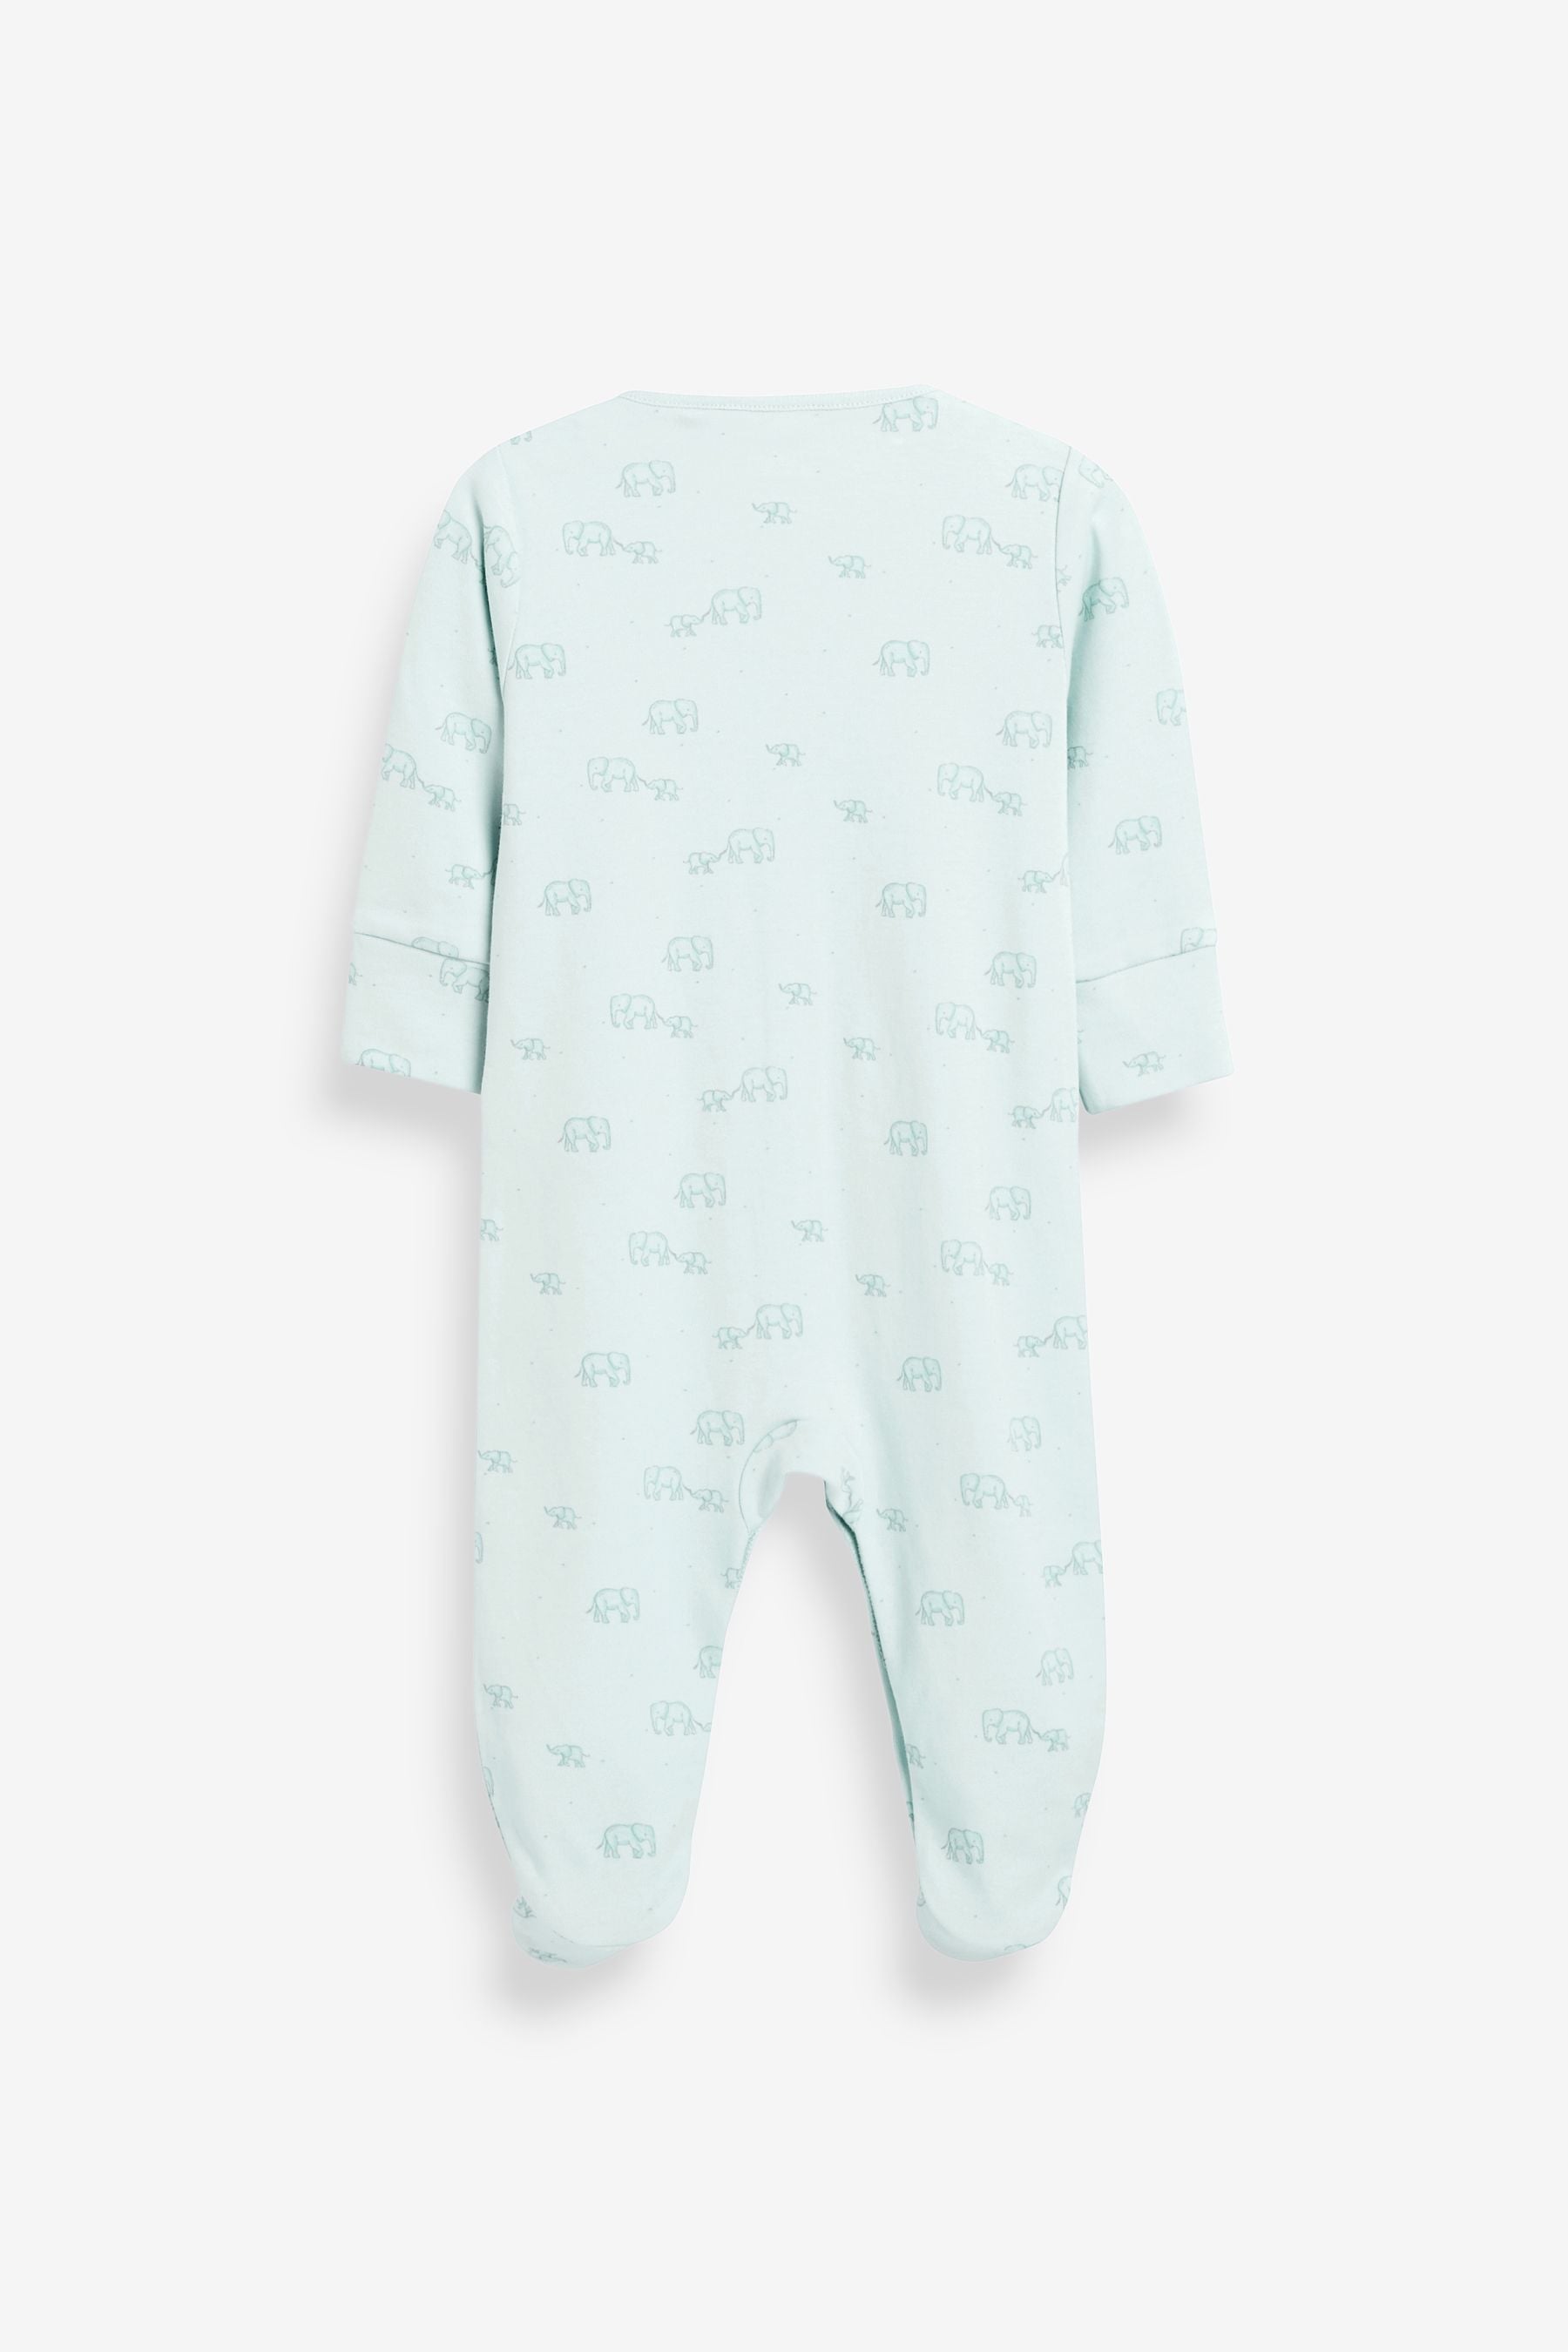 Pale Blue 4 Pack Baby Sleepsuits (0-3yrs)